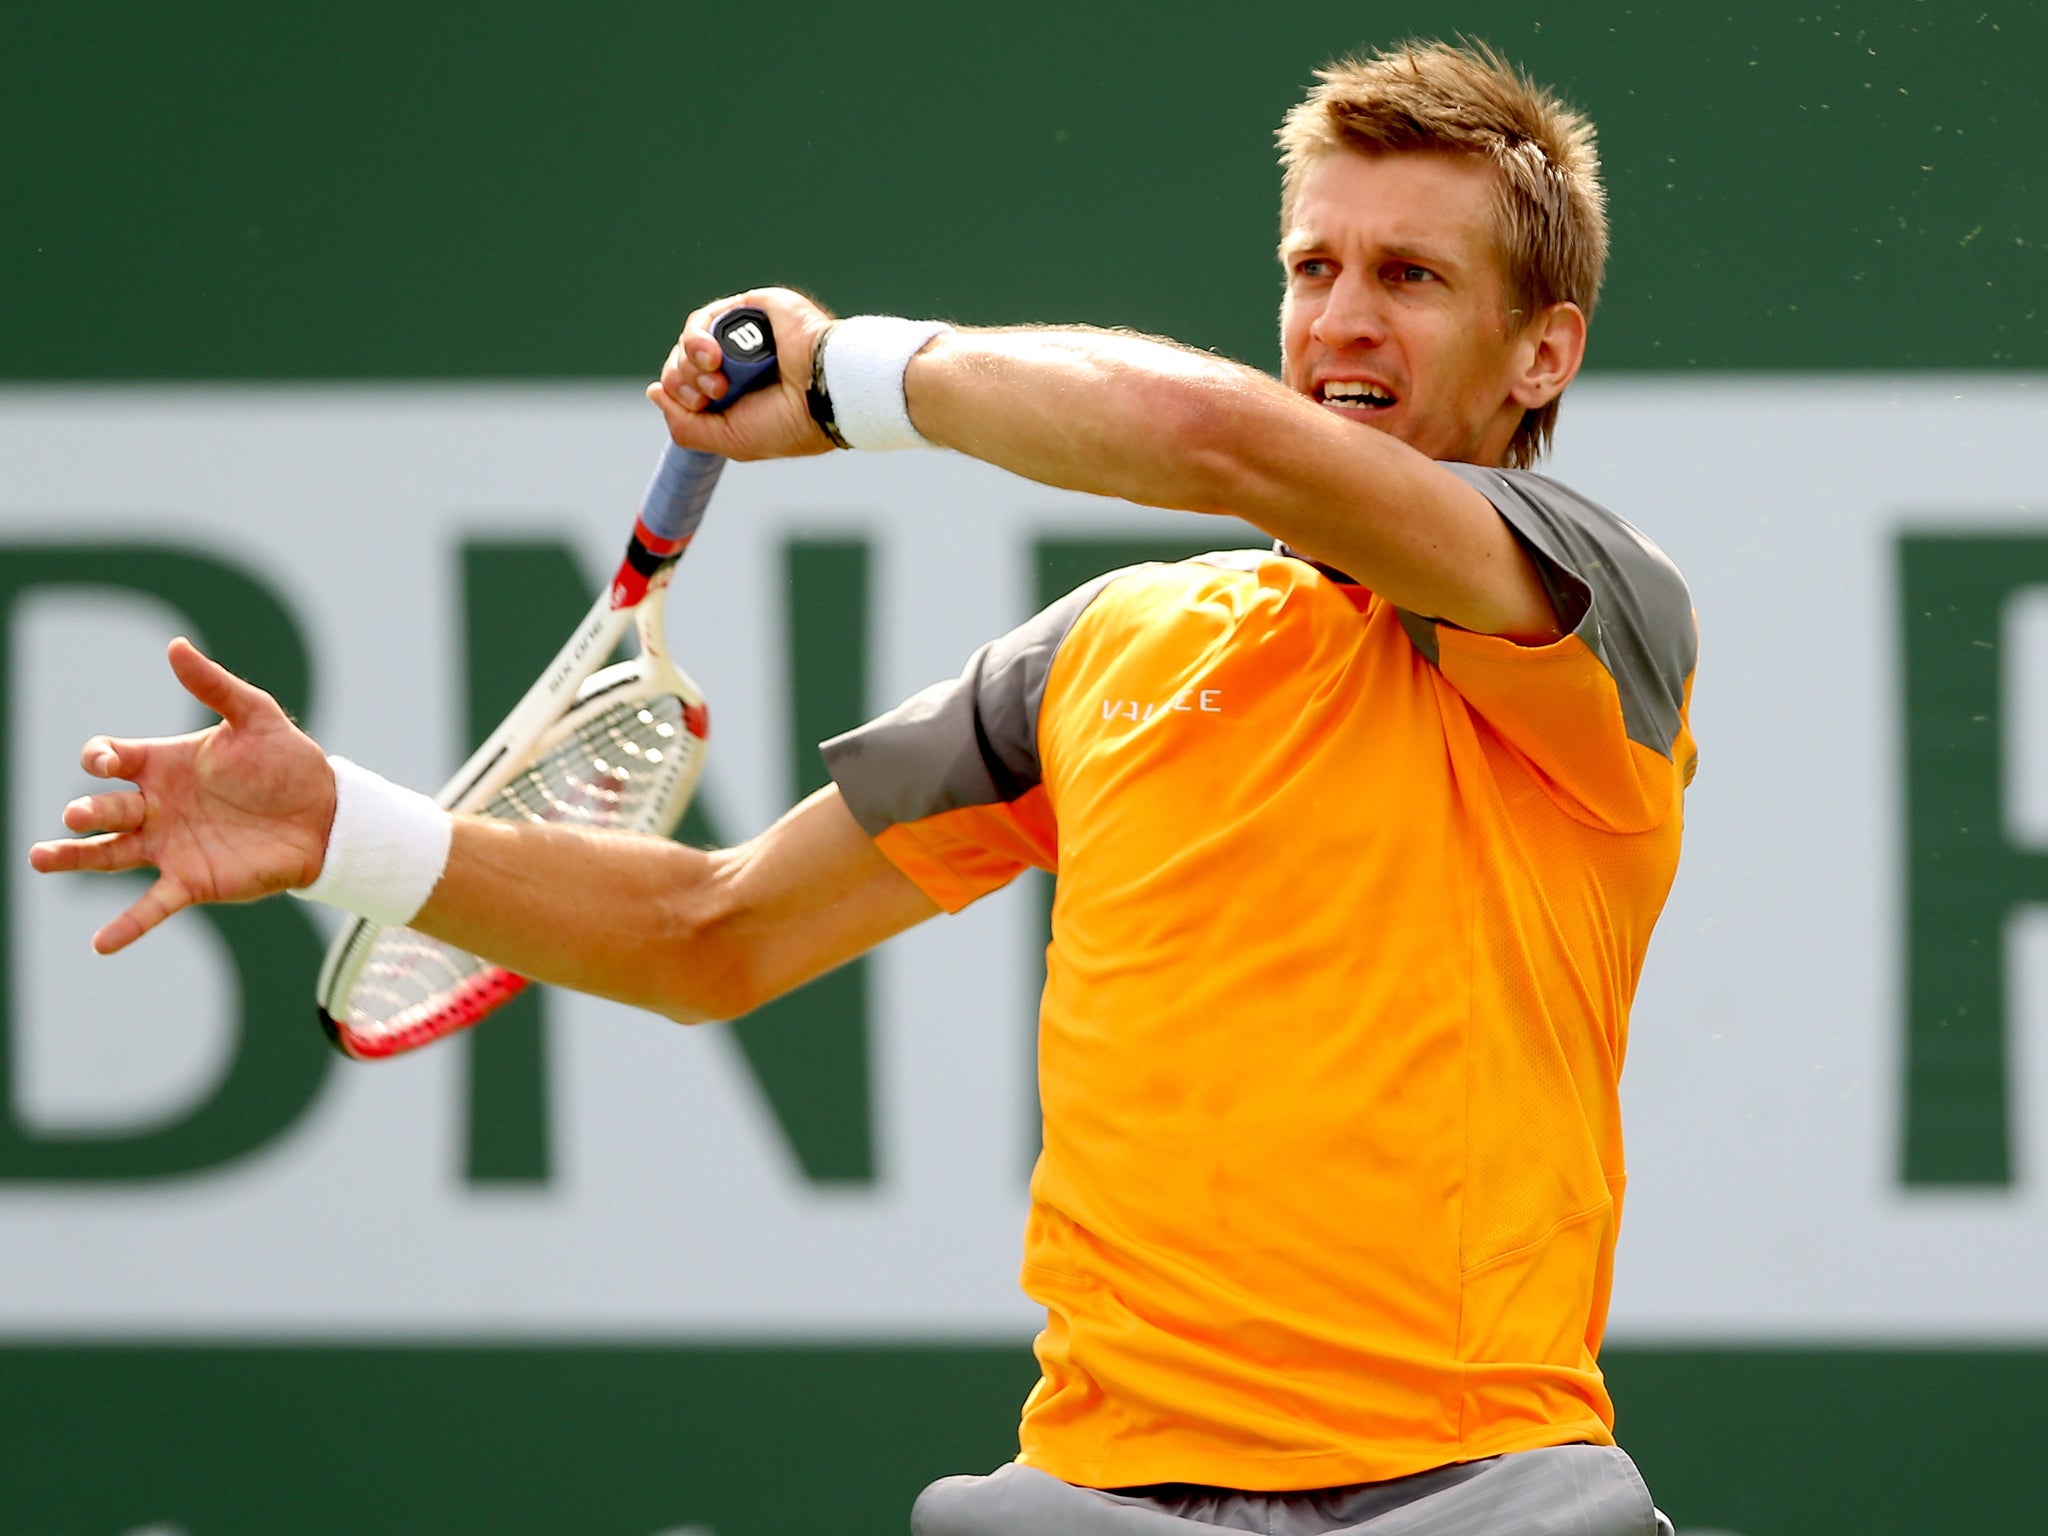 Jarkko Nieminen defeated Bernard Tomic in just 28 minutes and 20 seconds to record the fastest ever win on the ATP Tour